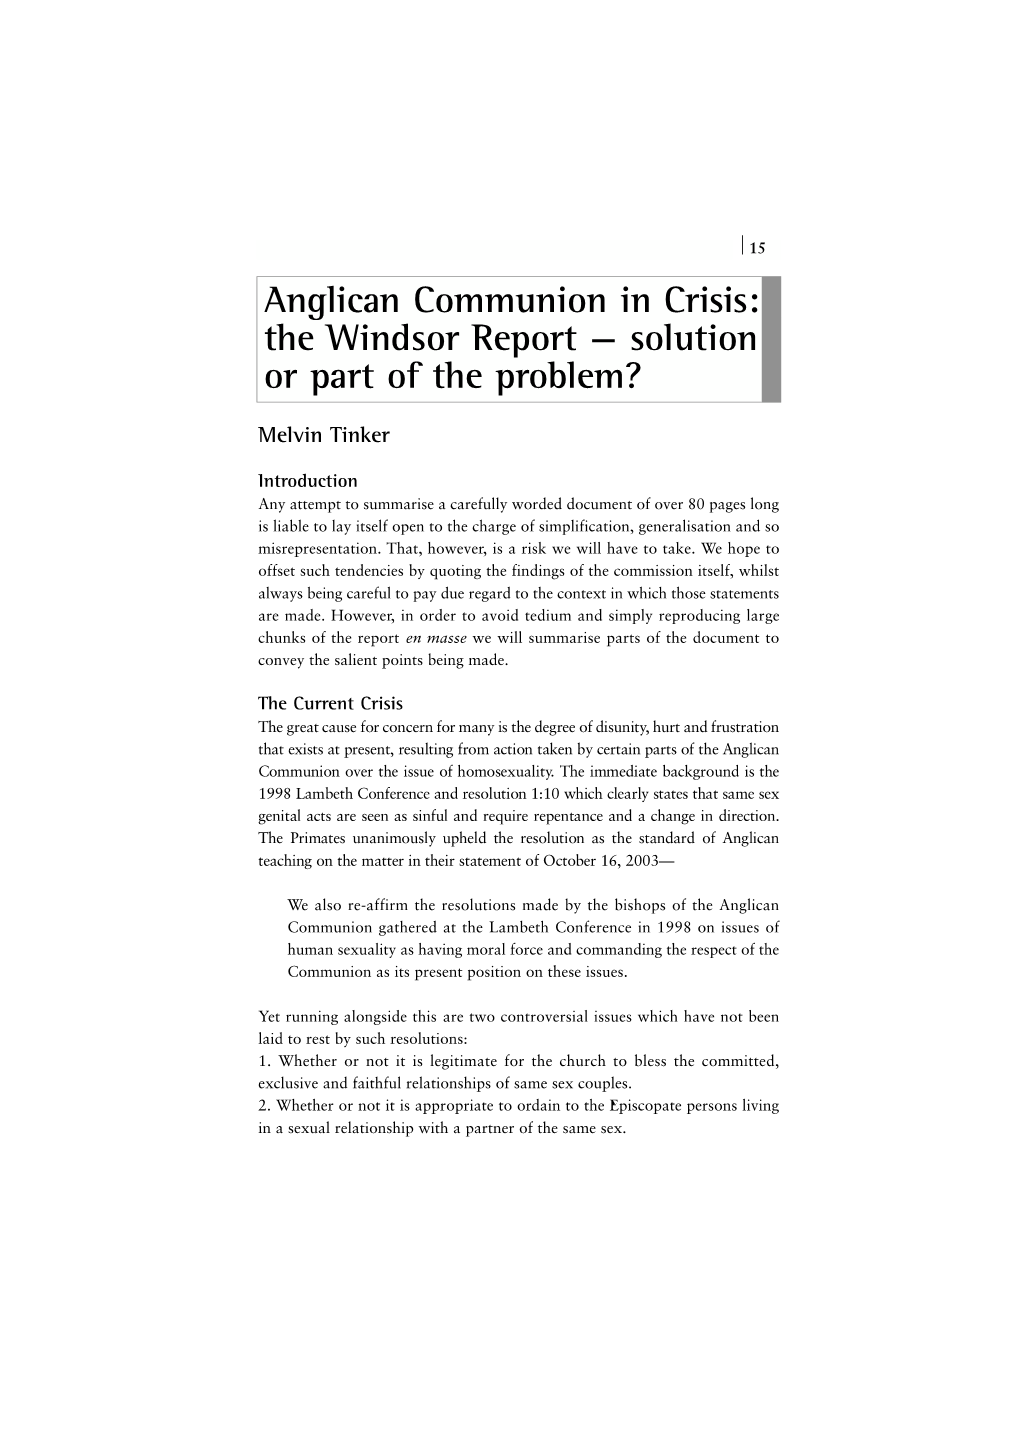 Anglican Communion in Crisis : the Windsor Report — Solution Or Part of the Pro B L E M ?